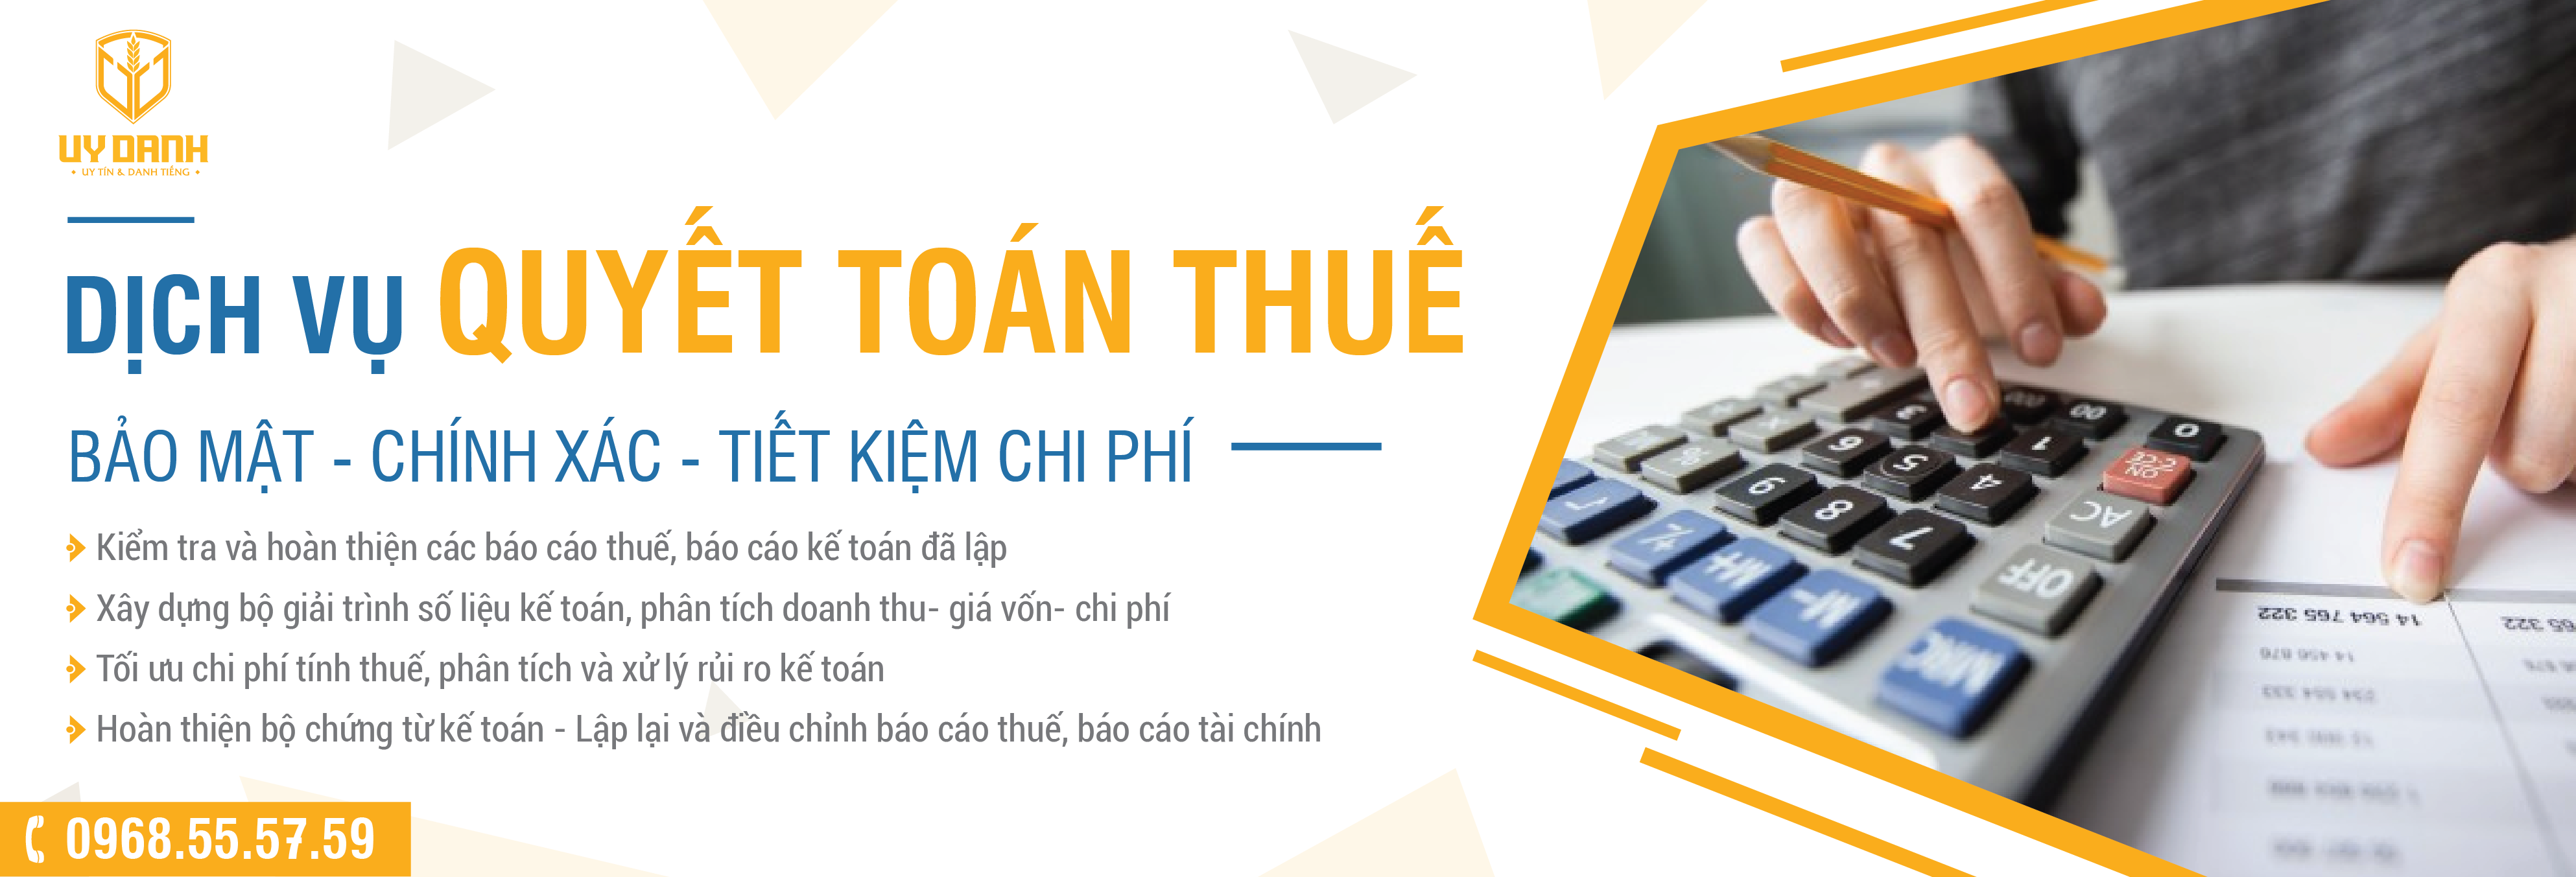 2.-Banner-animation-UY-Danh-Quyet-toan-thue-01